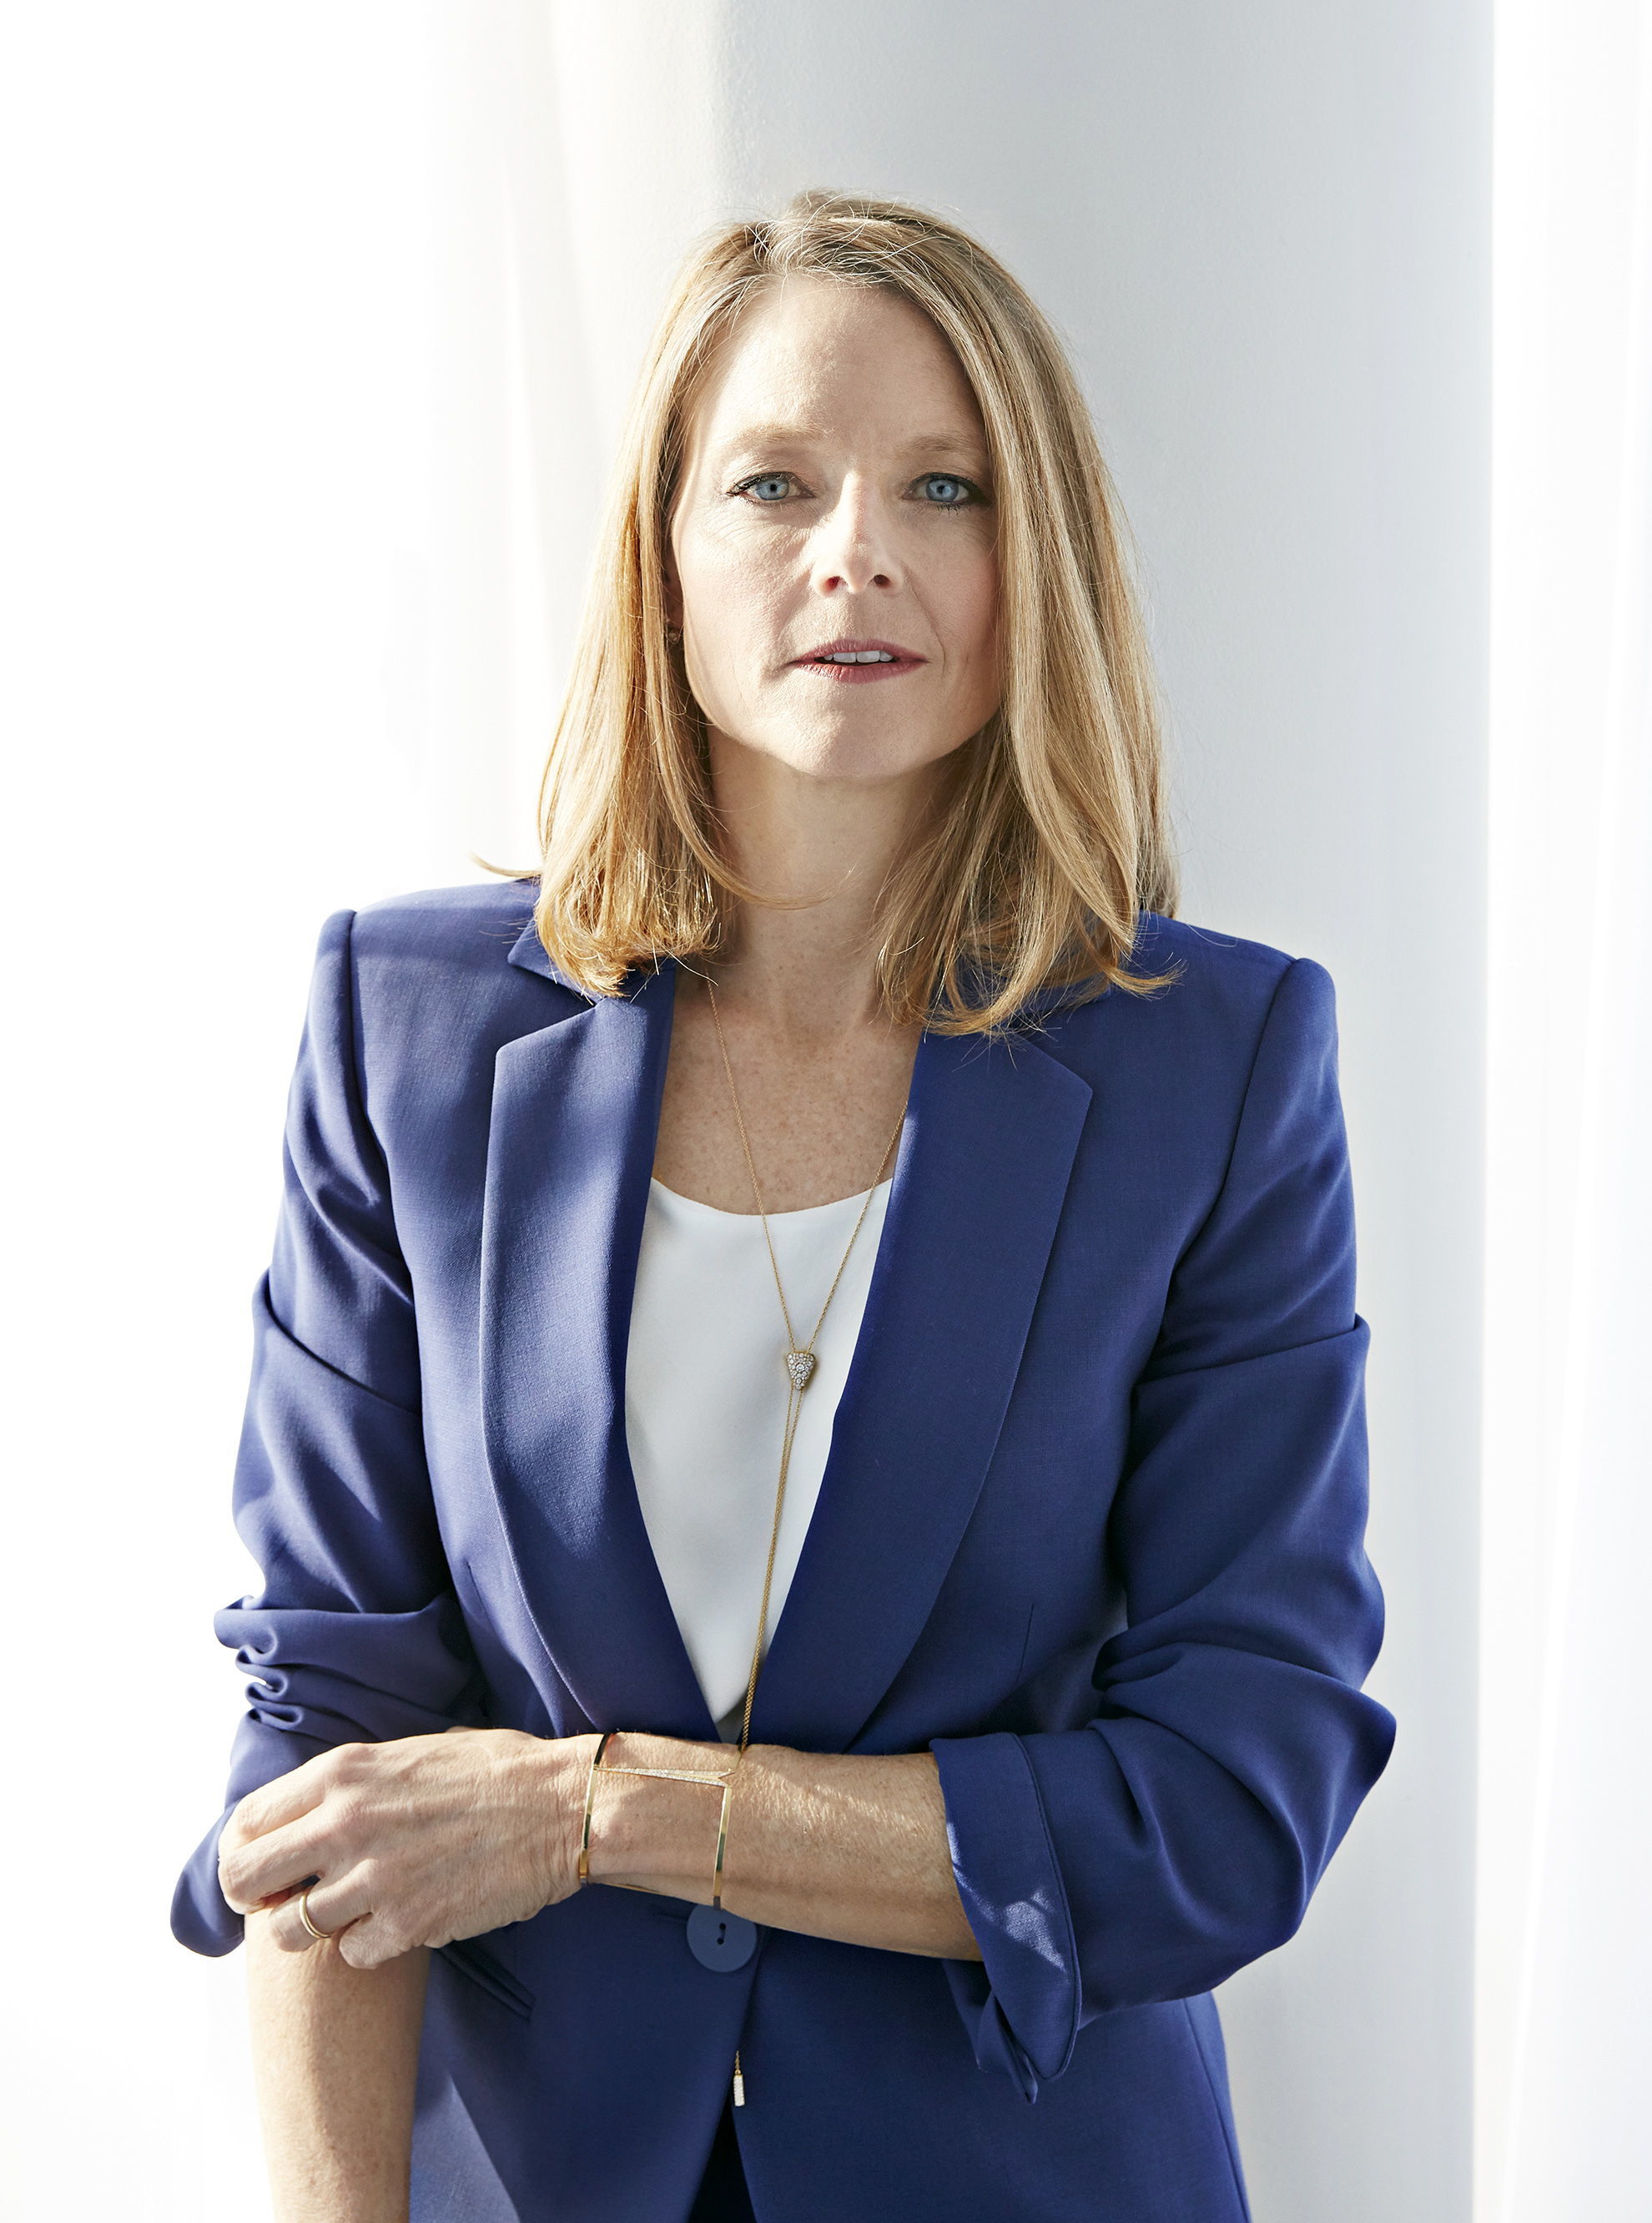 Jodie Foster: “I was a child actress, so I had to fight to be real.”